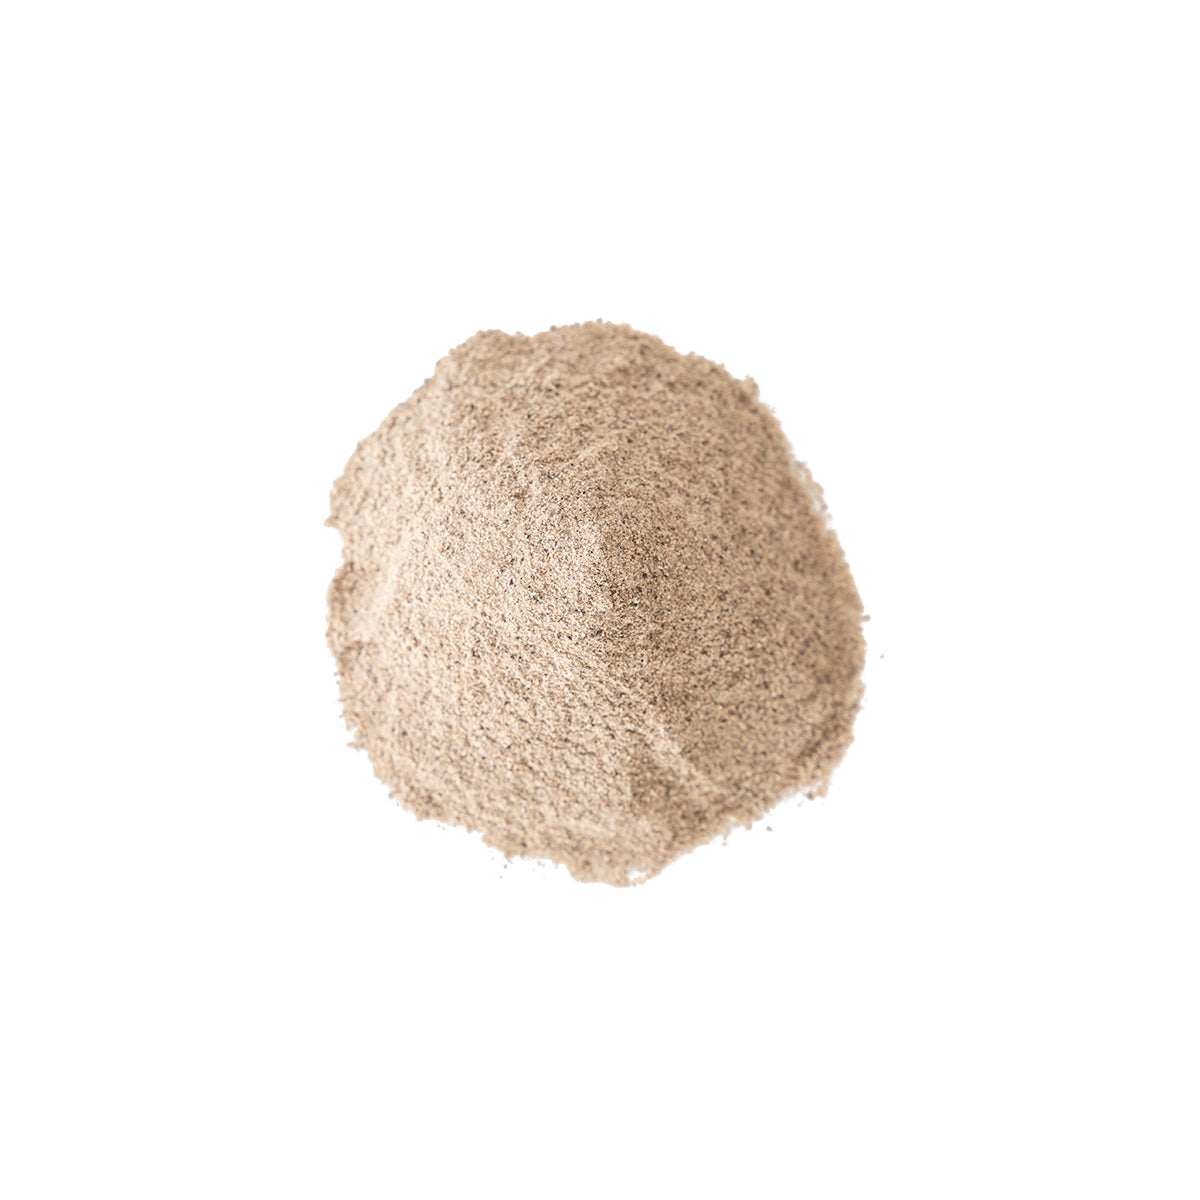 Primary Image of Comfrey Root Powder (Symphytum officinale)